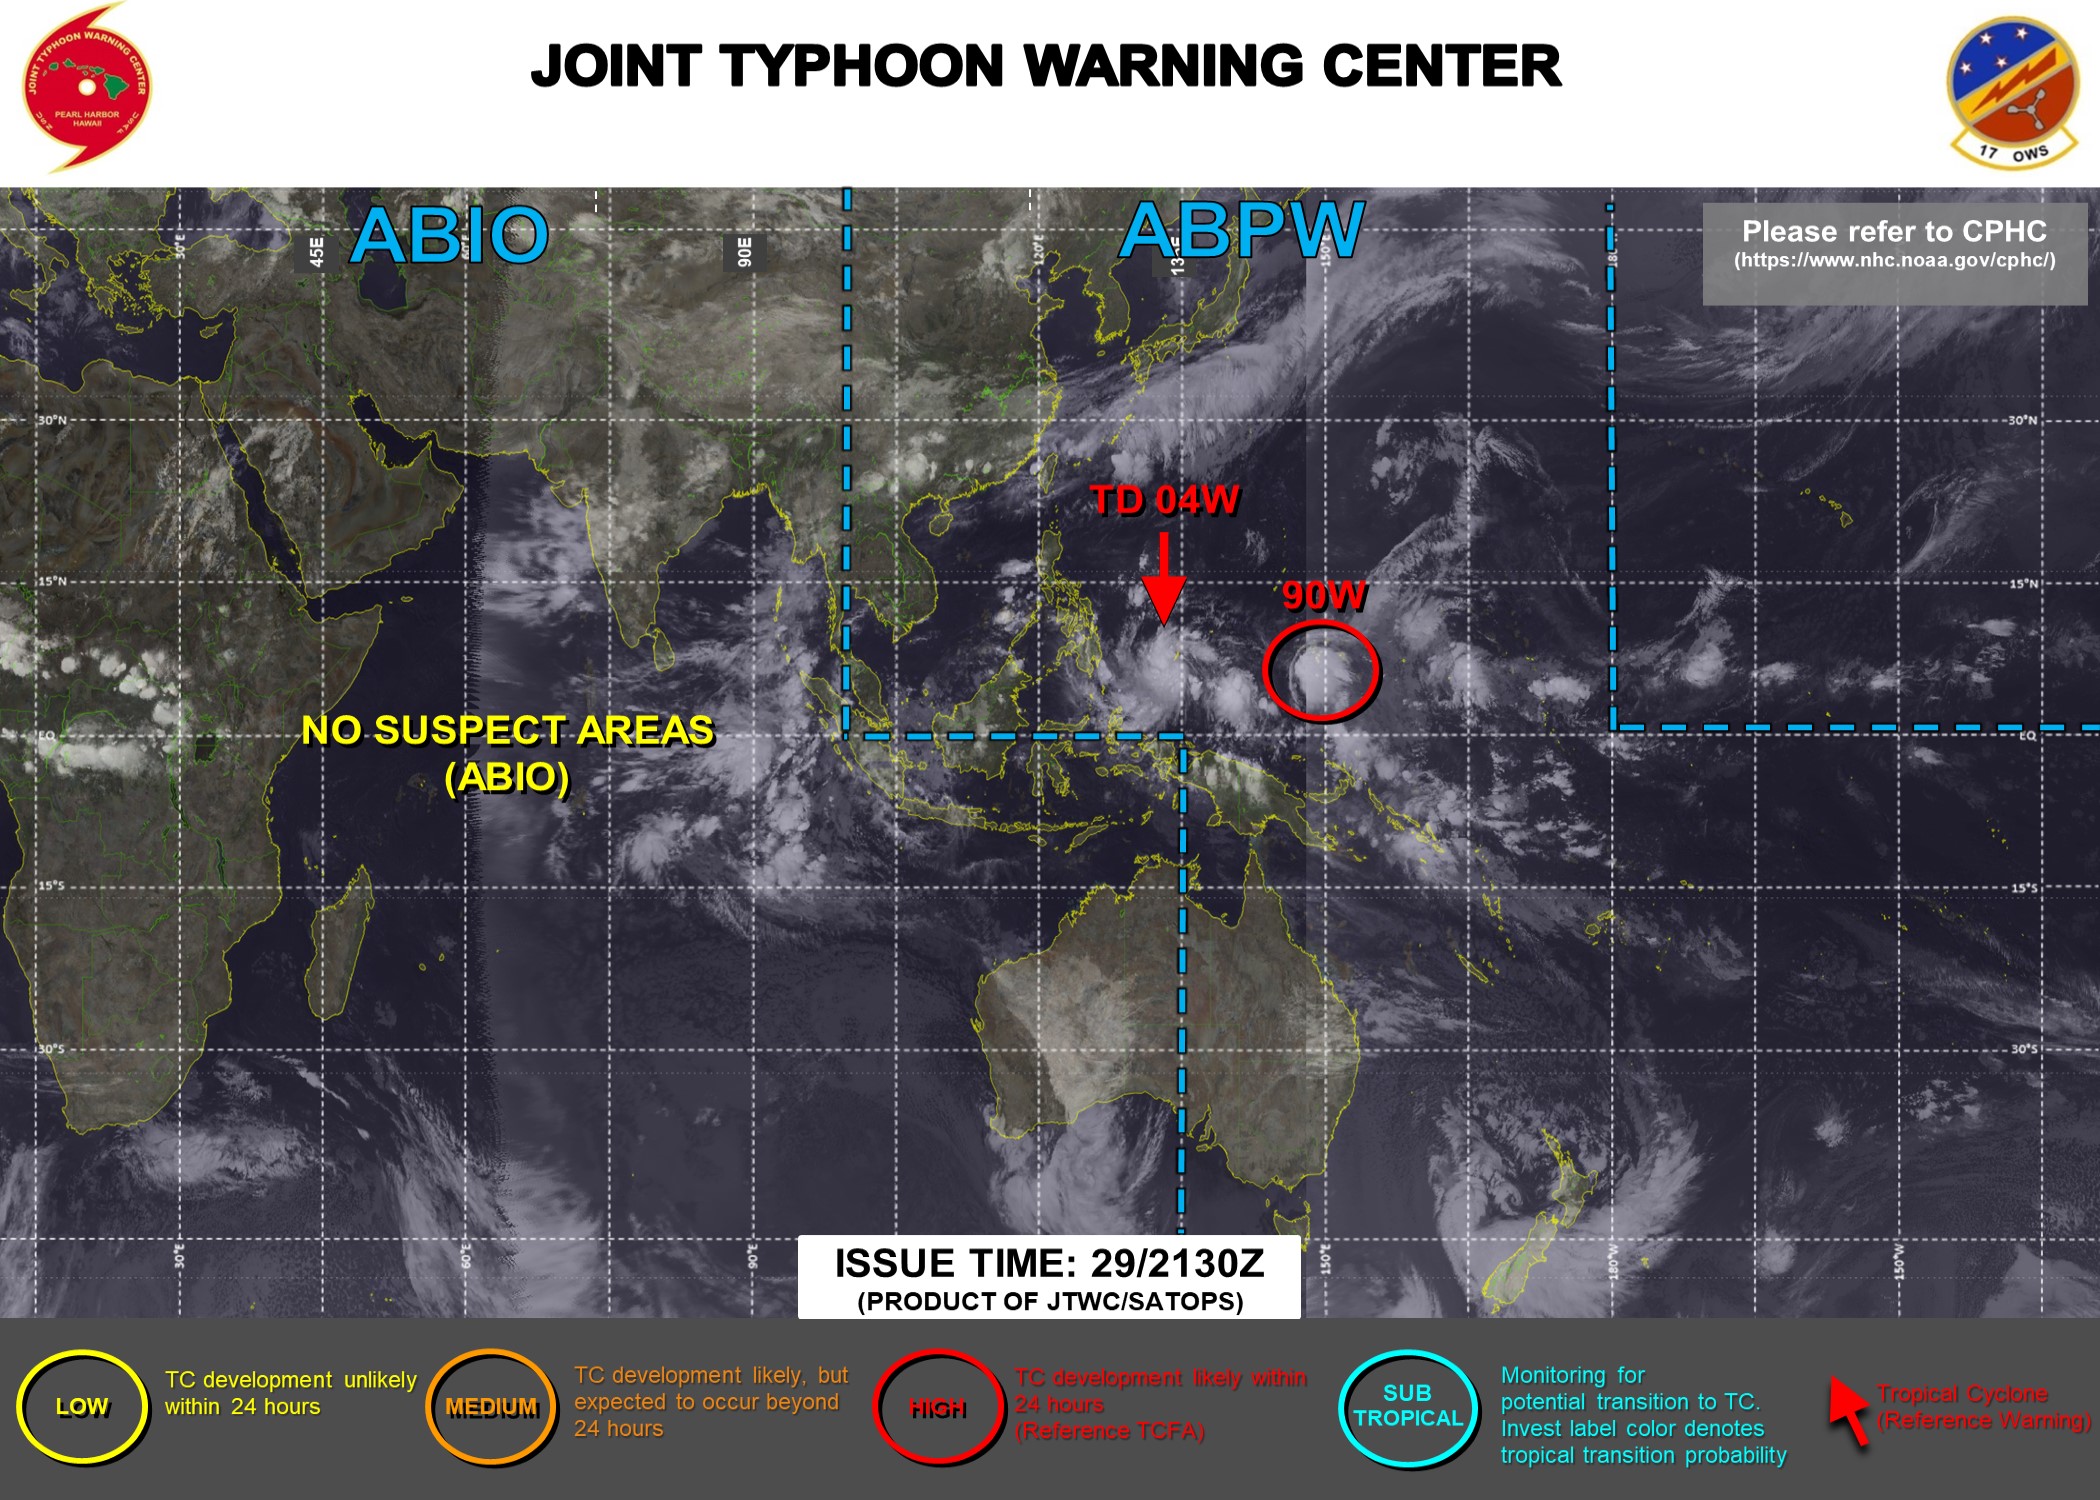 30/00UTC. INVEST 99W WAS UP-GRADED TO TD 04W AT 29/21UTC. INVEST 90W IS STILL HIGH FOR THE NEXT 24HOURS. JTWC IS ISSUING 6HOURLY WARNINGS AND 3HOURLY SATELLITE BULLETINS ON 04W.